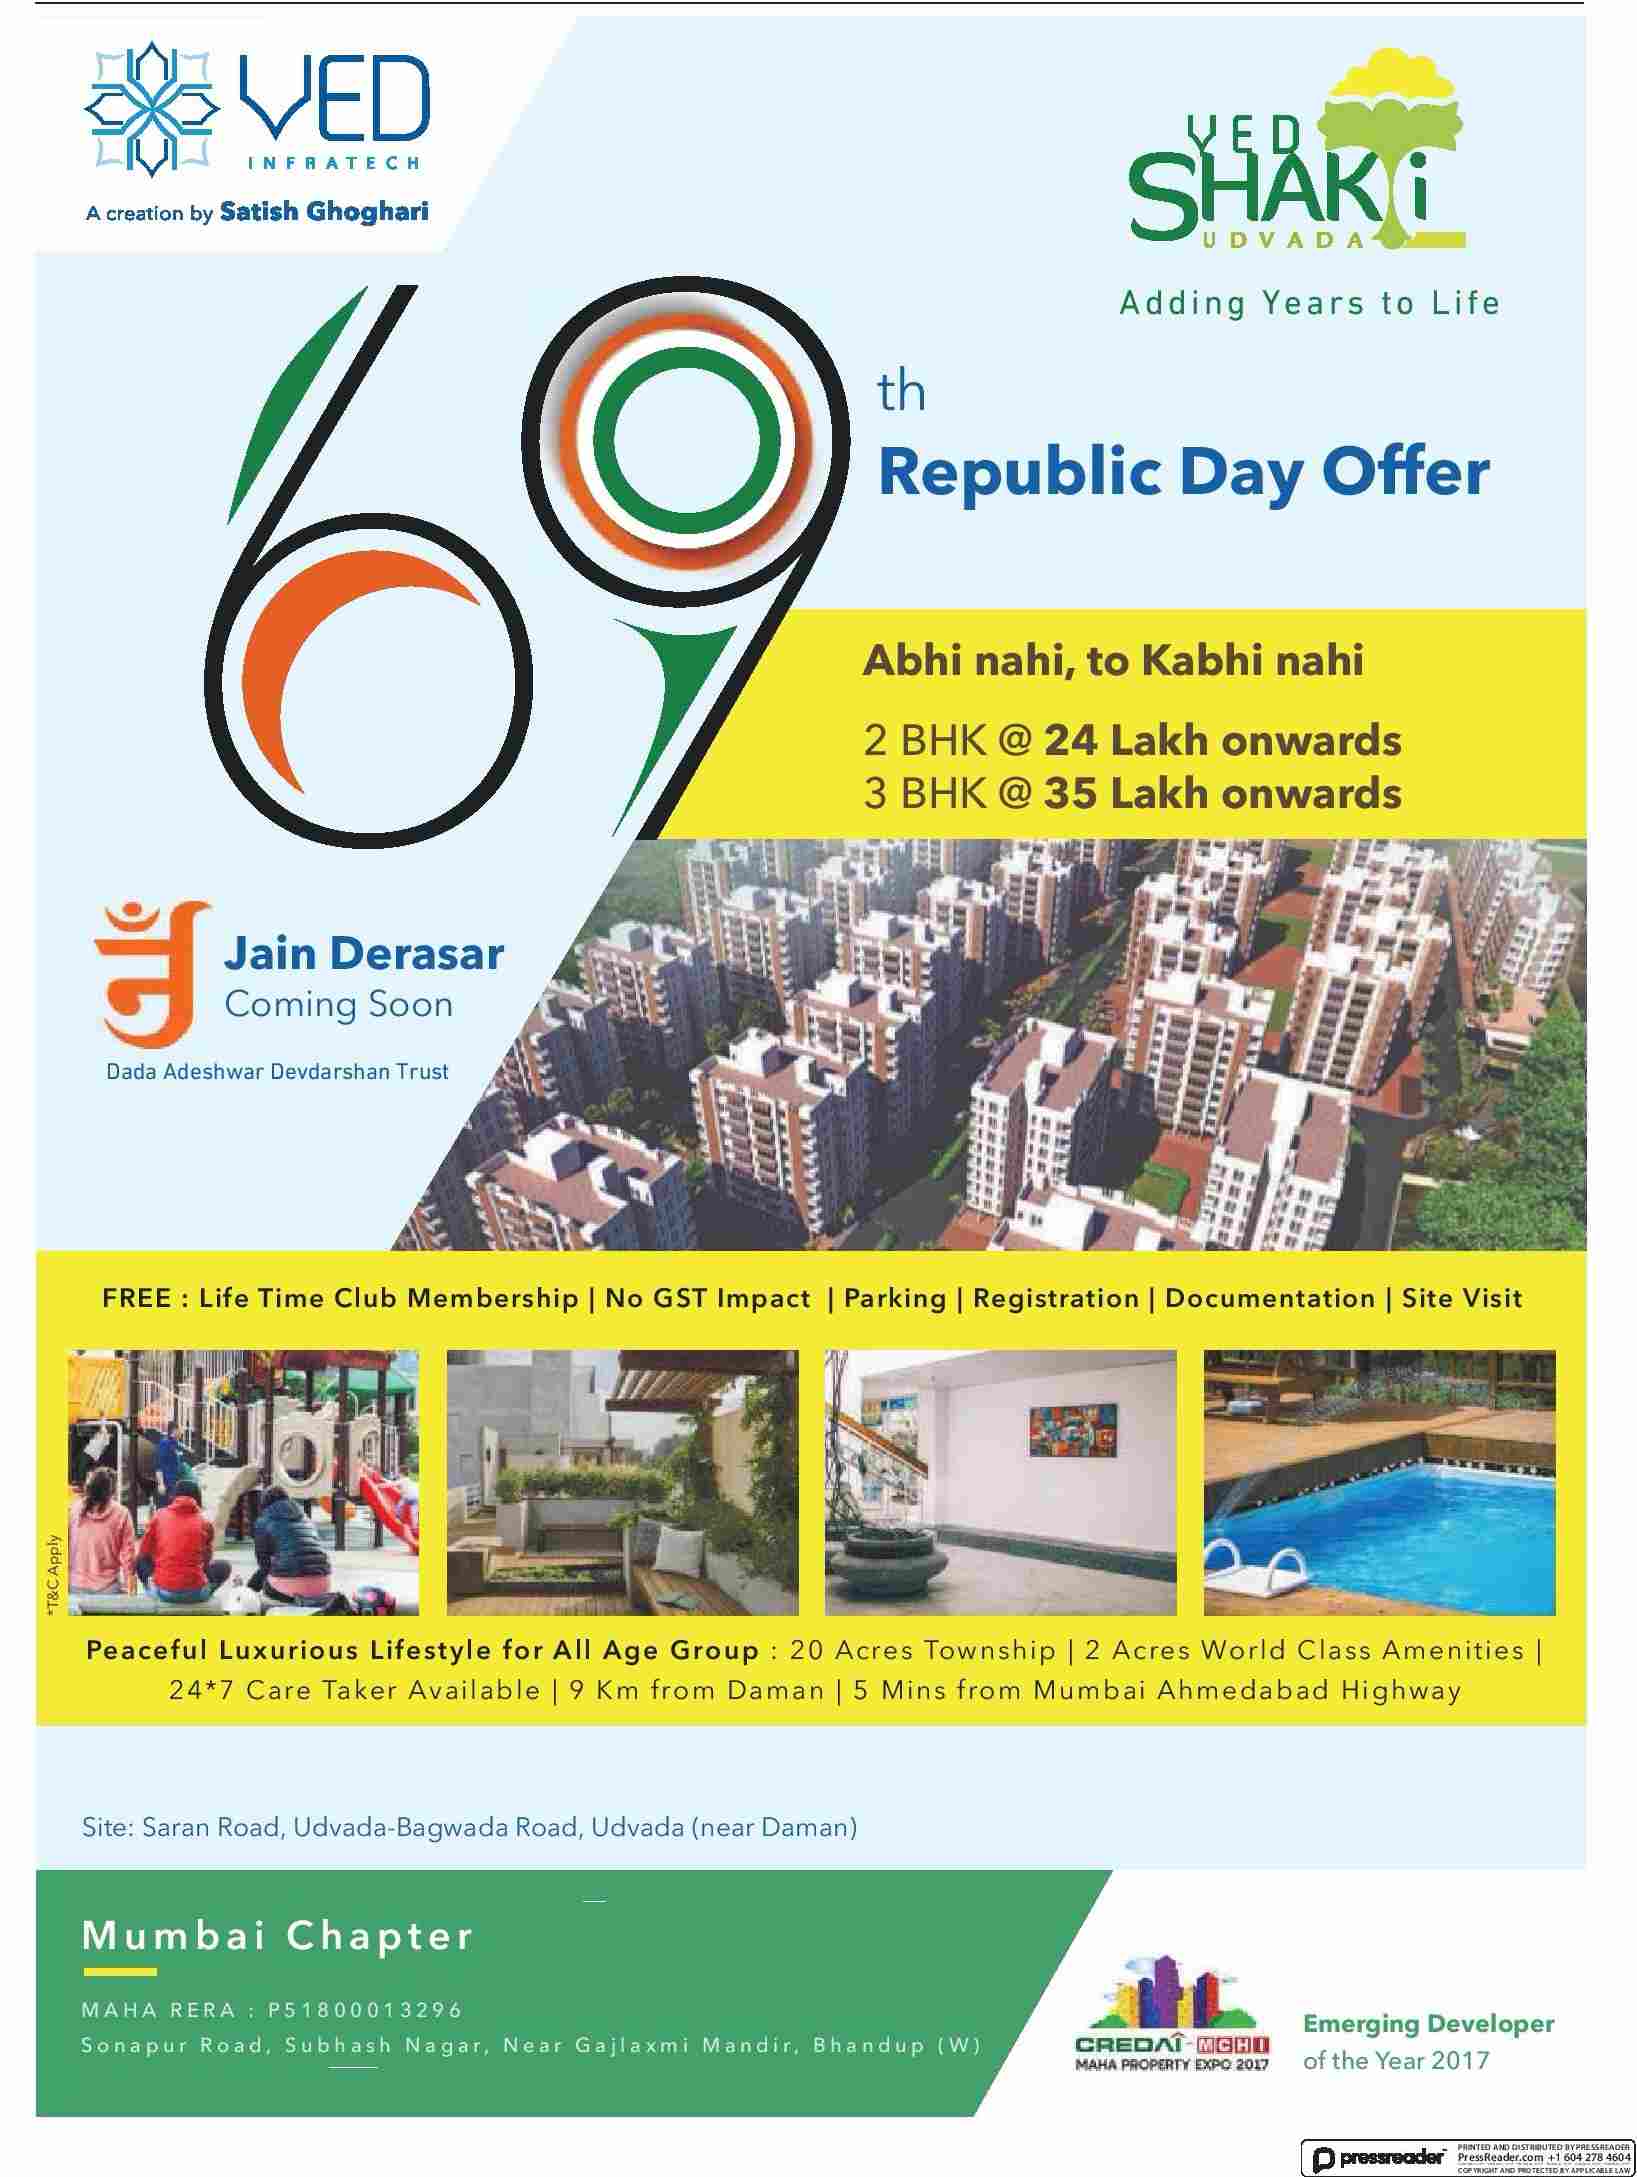 Avail the 69th Republic Day offer at Ved Shakti in Mumbai Update